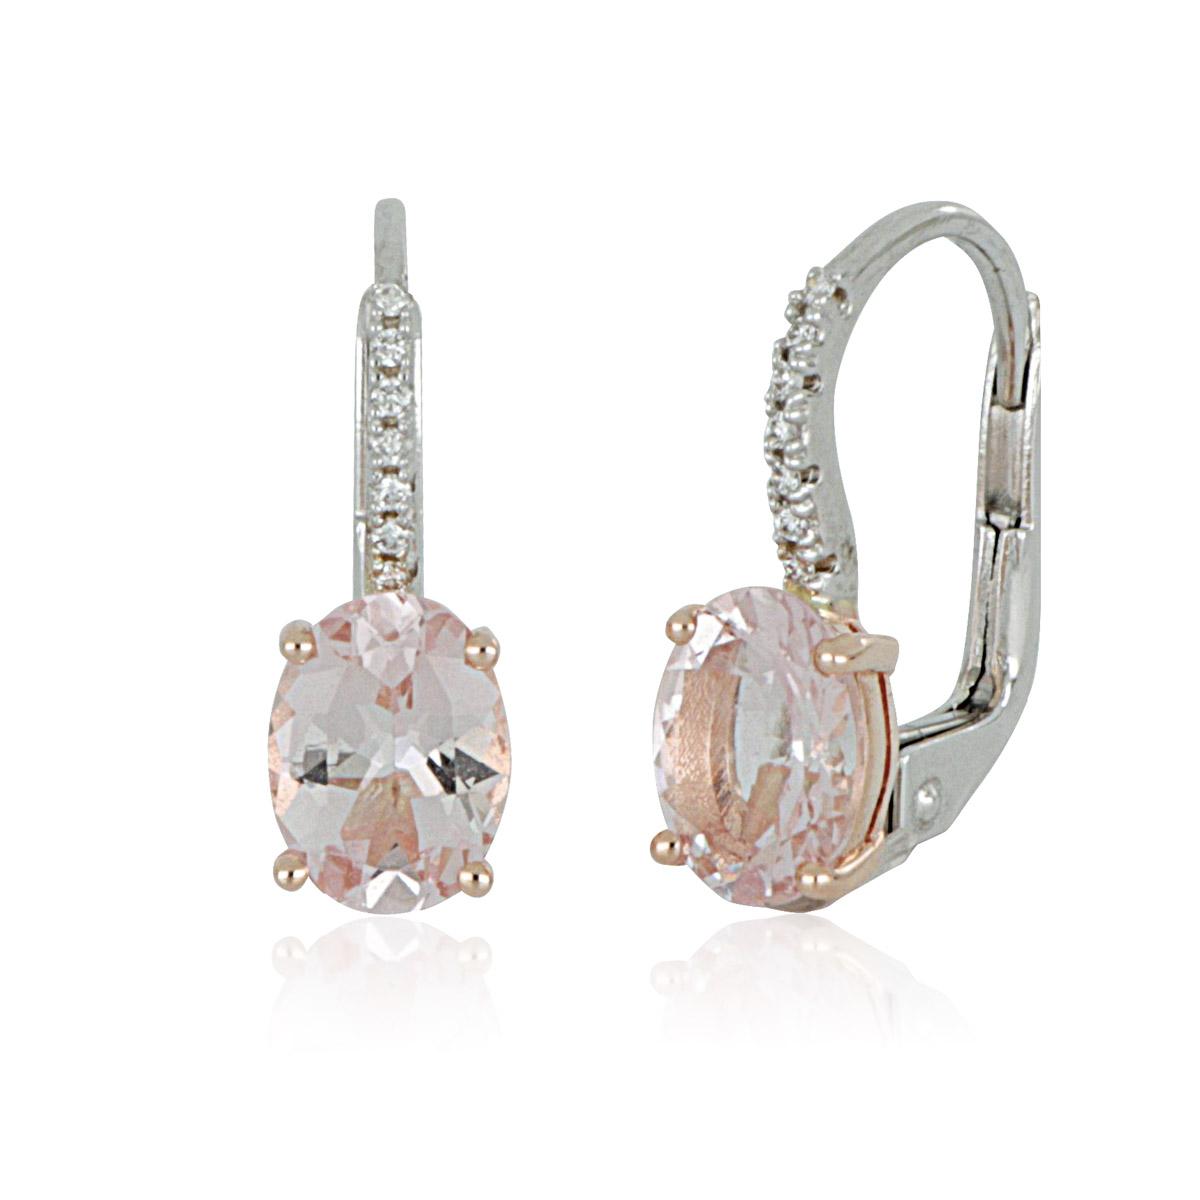 18kt gold earrings with Morganite and diamonds - OD465/MO-LH